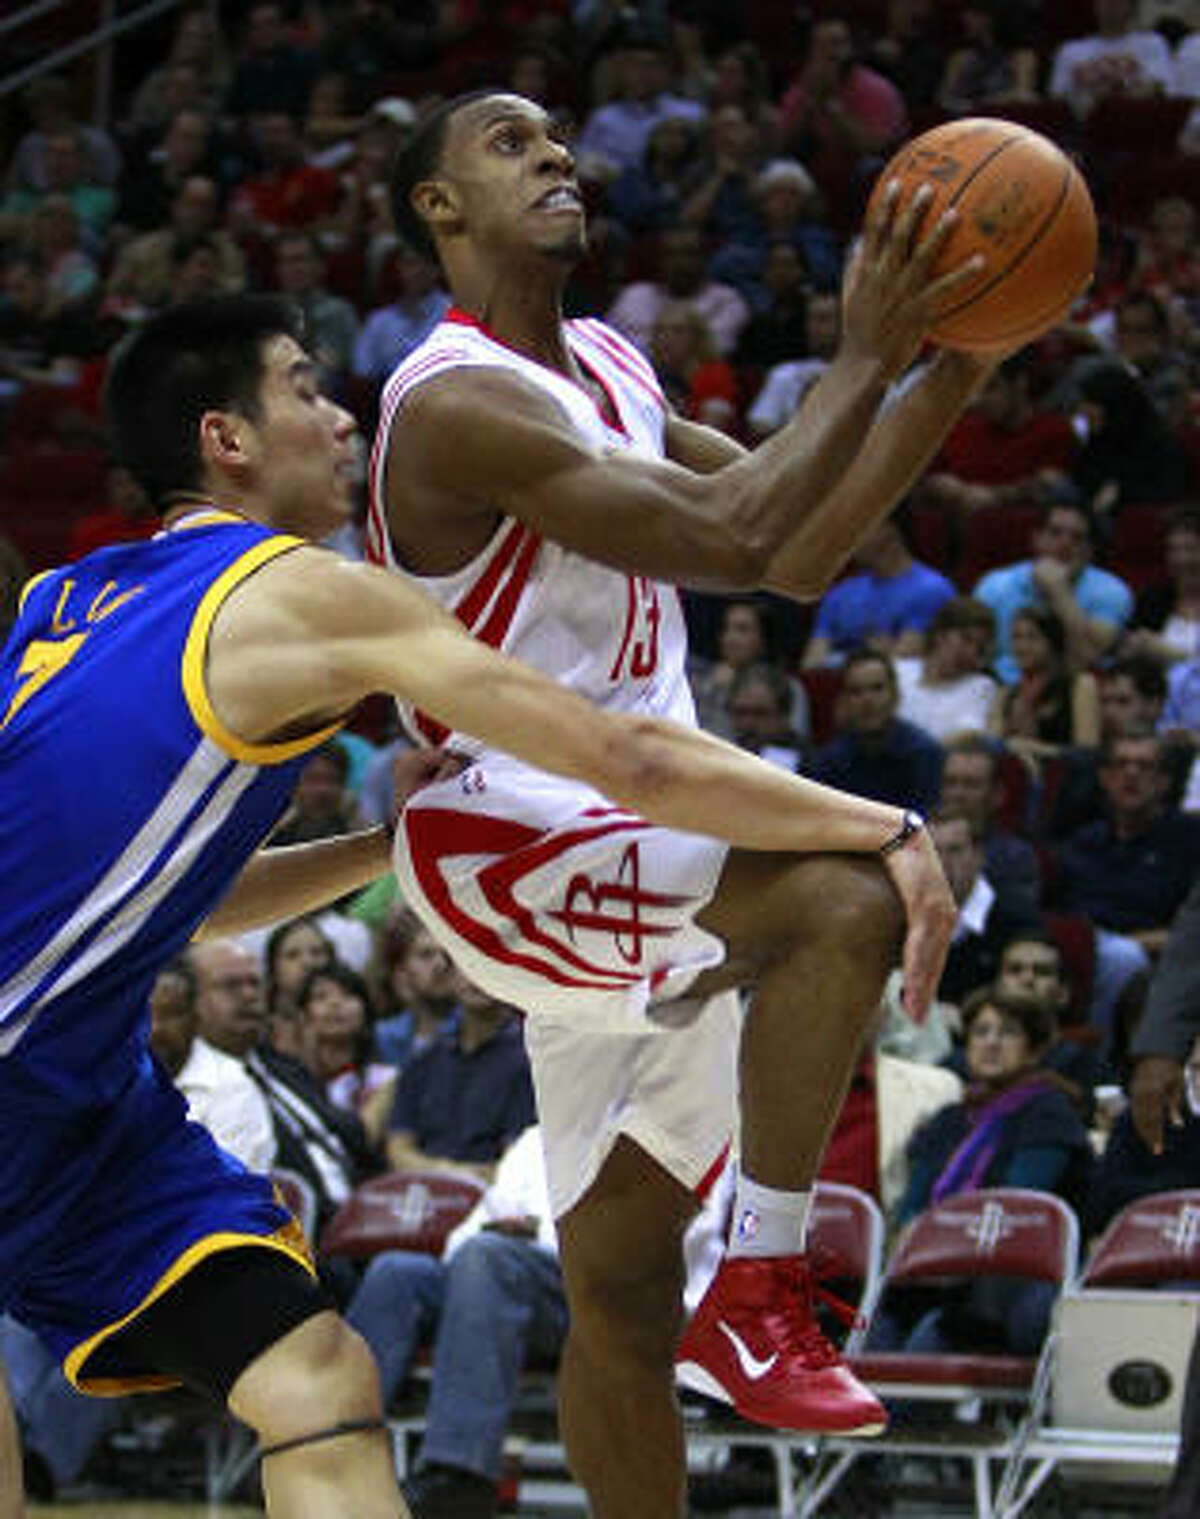 Ishmael Smith, Grizzlies Smith spent the first half of this season between the Rockets and their D-League affiliate before being included in the trade to Memphis.